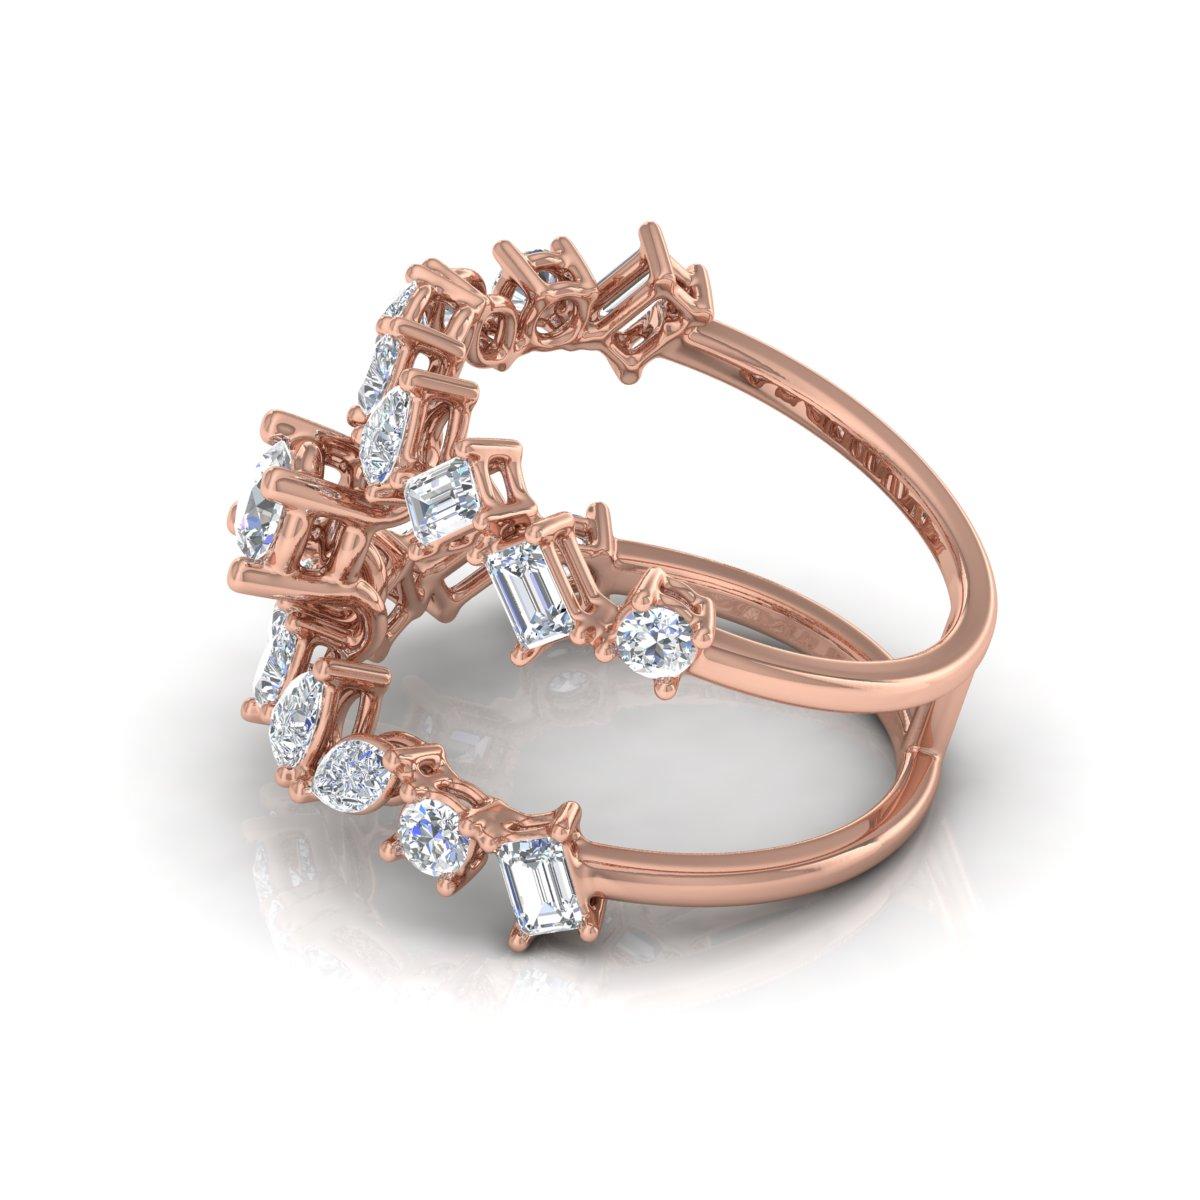 For Sale:  2.35 Carat SI Clarity HI Color Diamond Designer Ring Solid 18k Rose Gold Jewelry 8